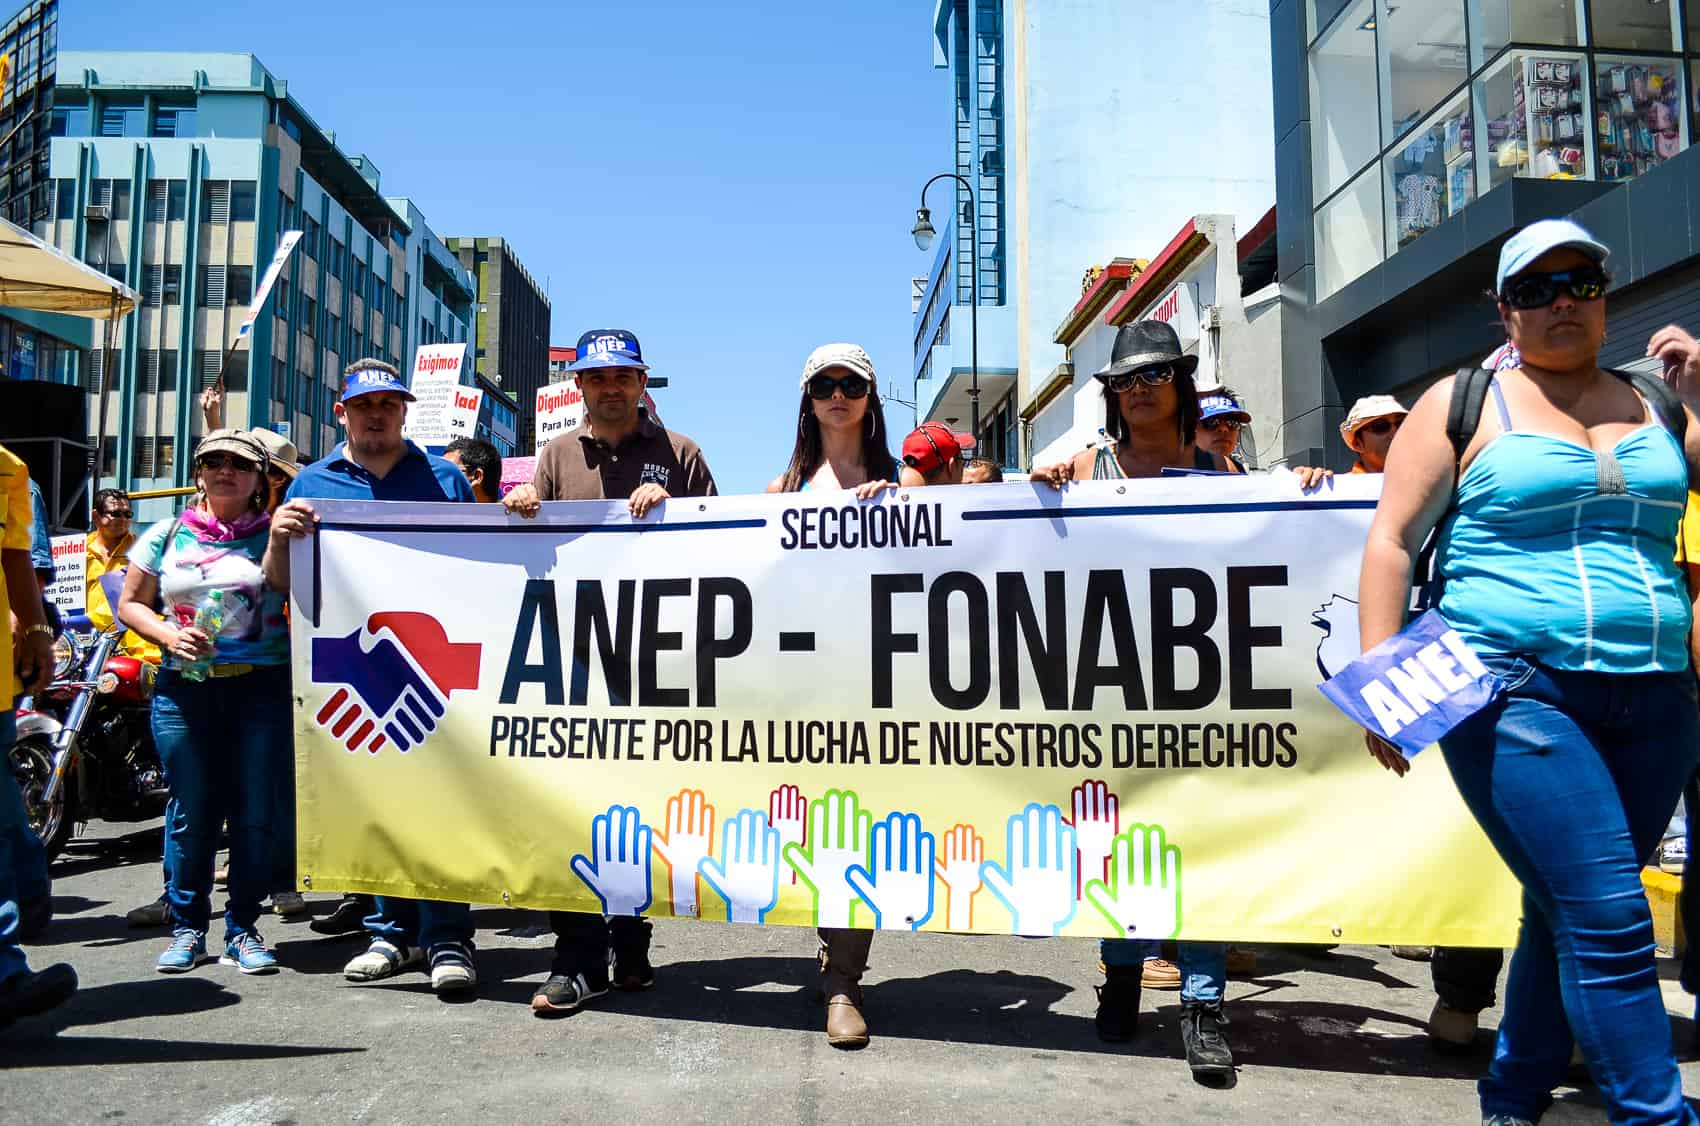 ANEP public demonstration